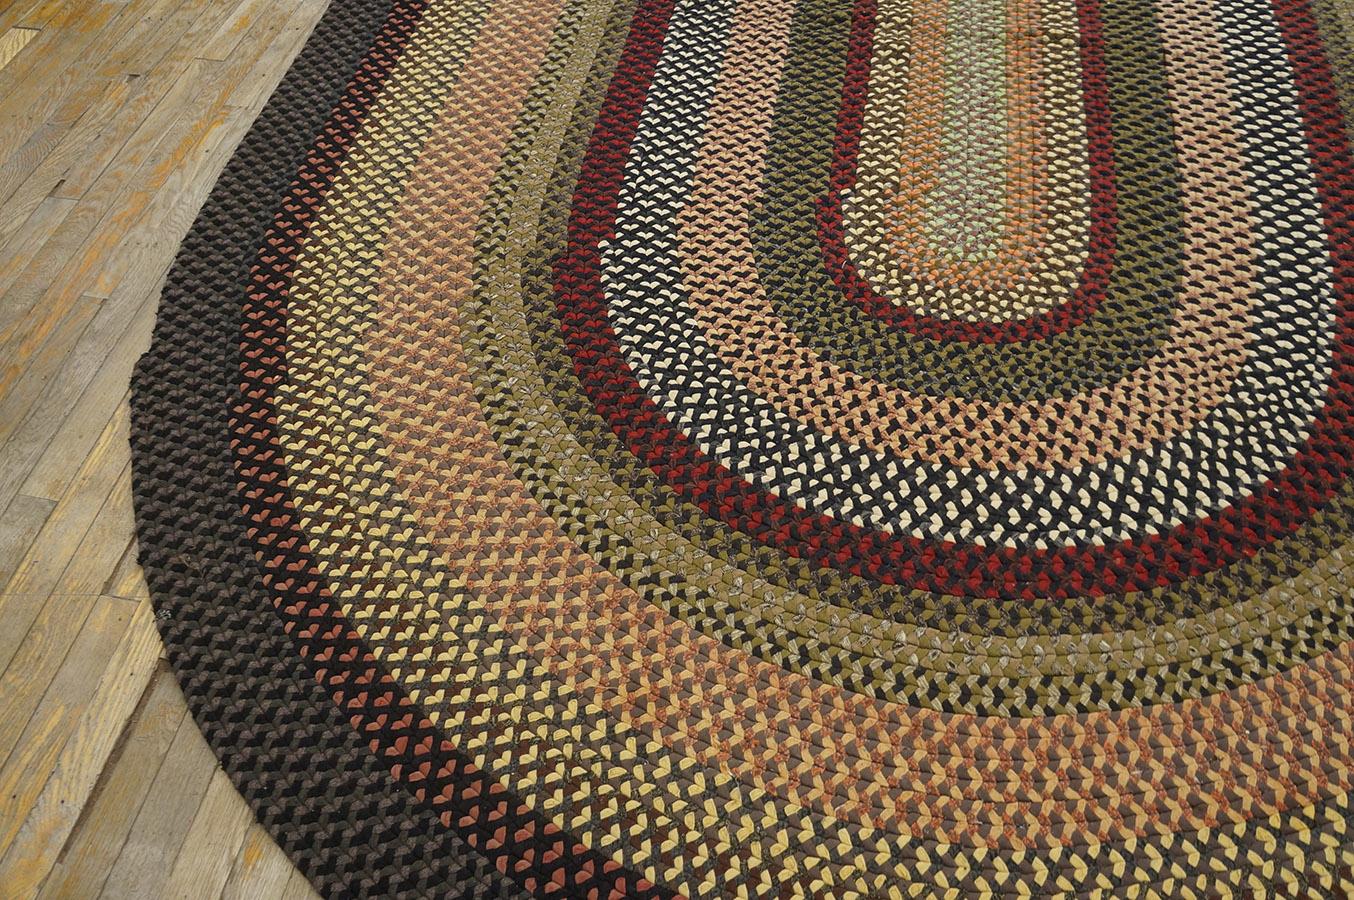 Cotton 1930s American Braided Rug ( 7'6